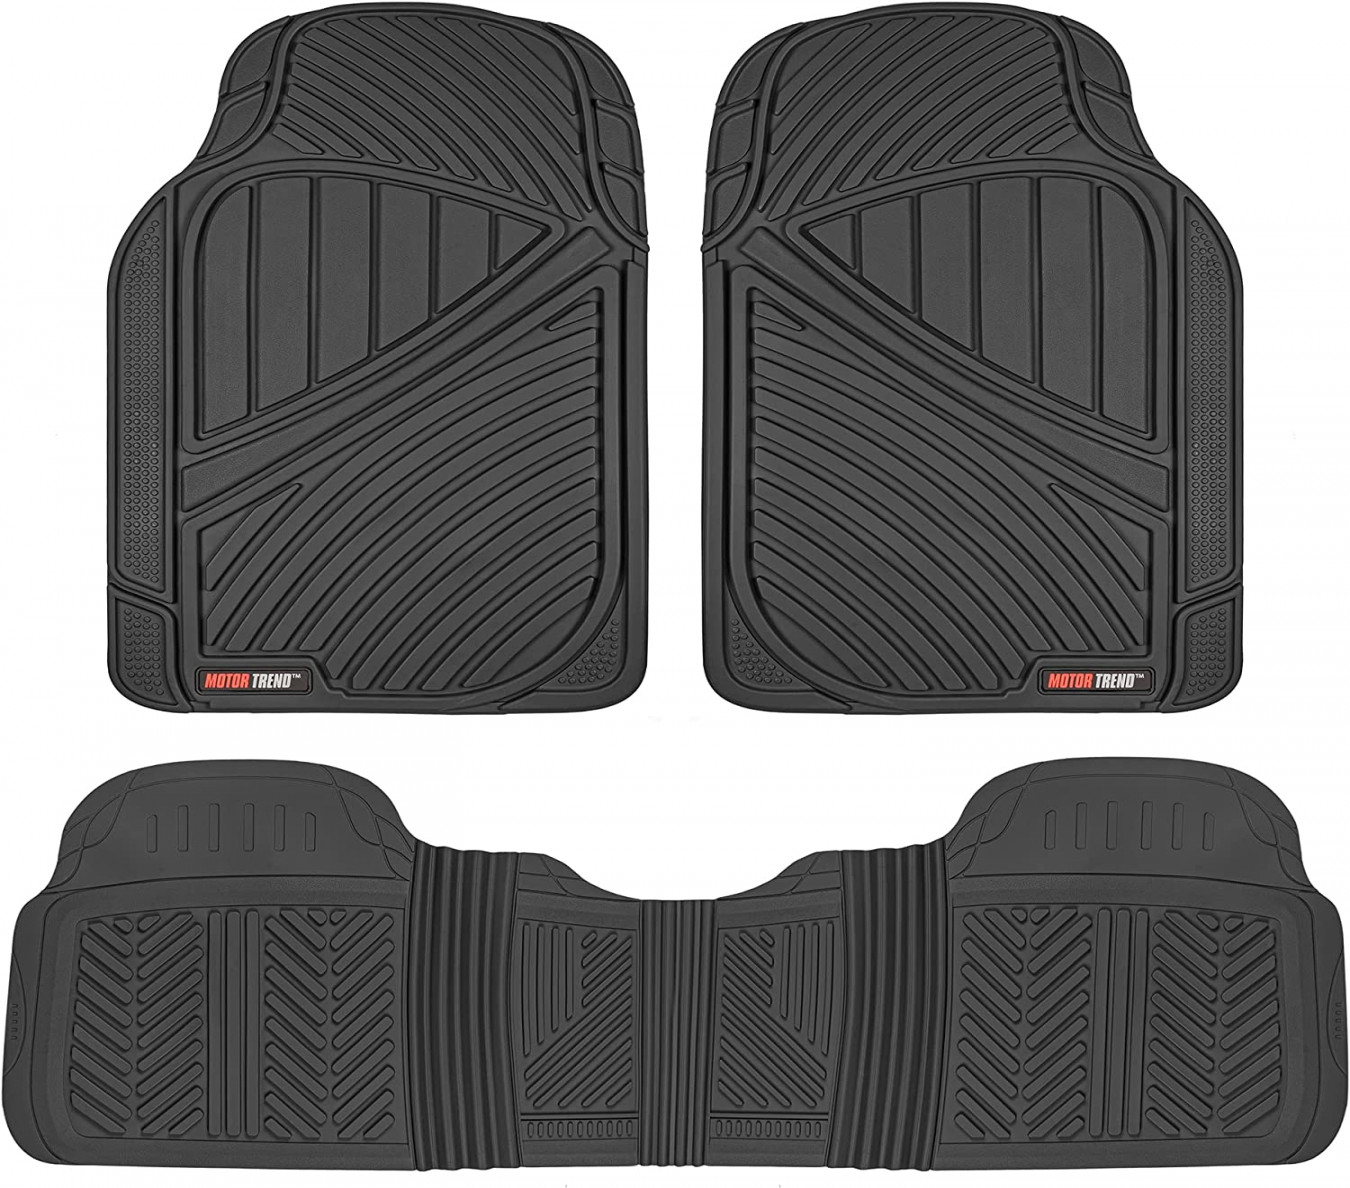 Motor Trend FlexTough Performance All Weather Rubber Car Floor Mats -   Pack Floor Mats Automotive Insoles for Cars, Trucks, SUV, Heavy Duty